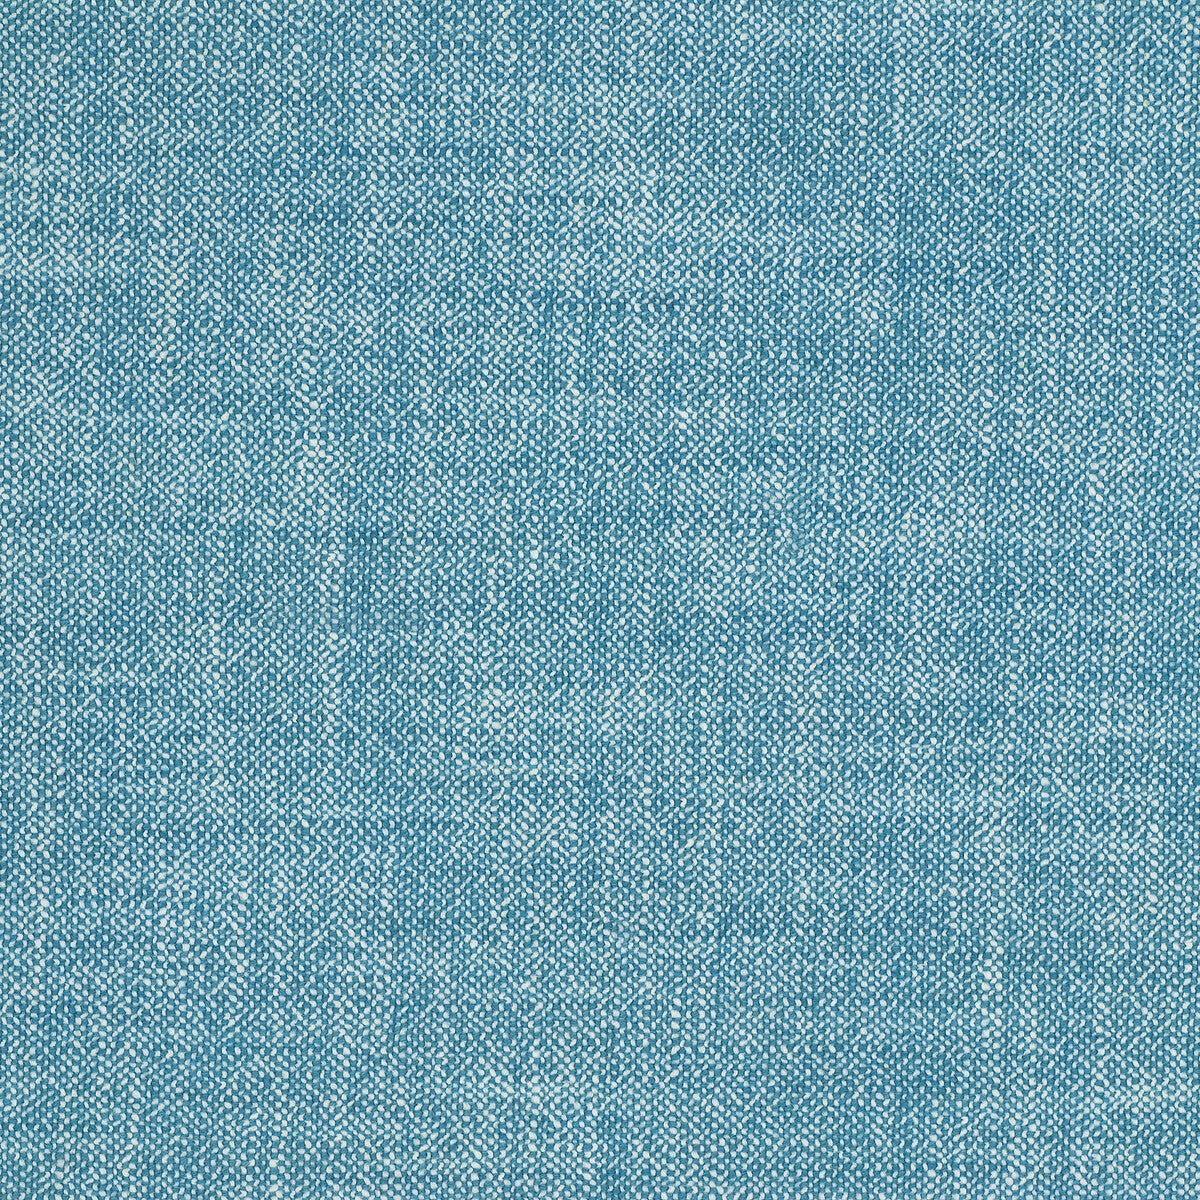 Elodie Texture fabric in turquoise color - pattern 8017143.13.0 - by Brunschwig &amp; Fils